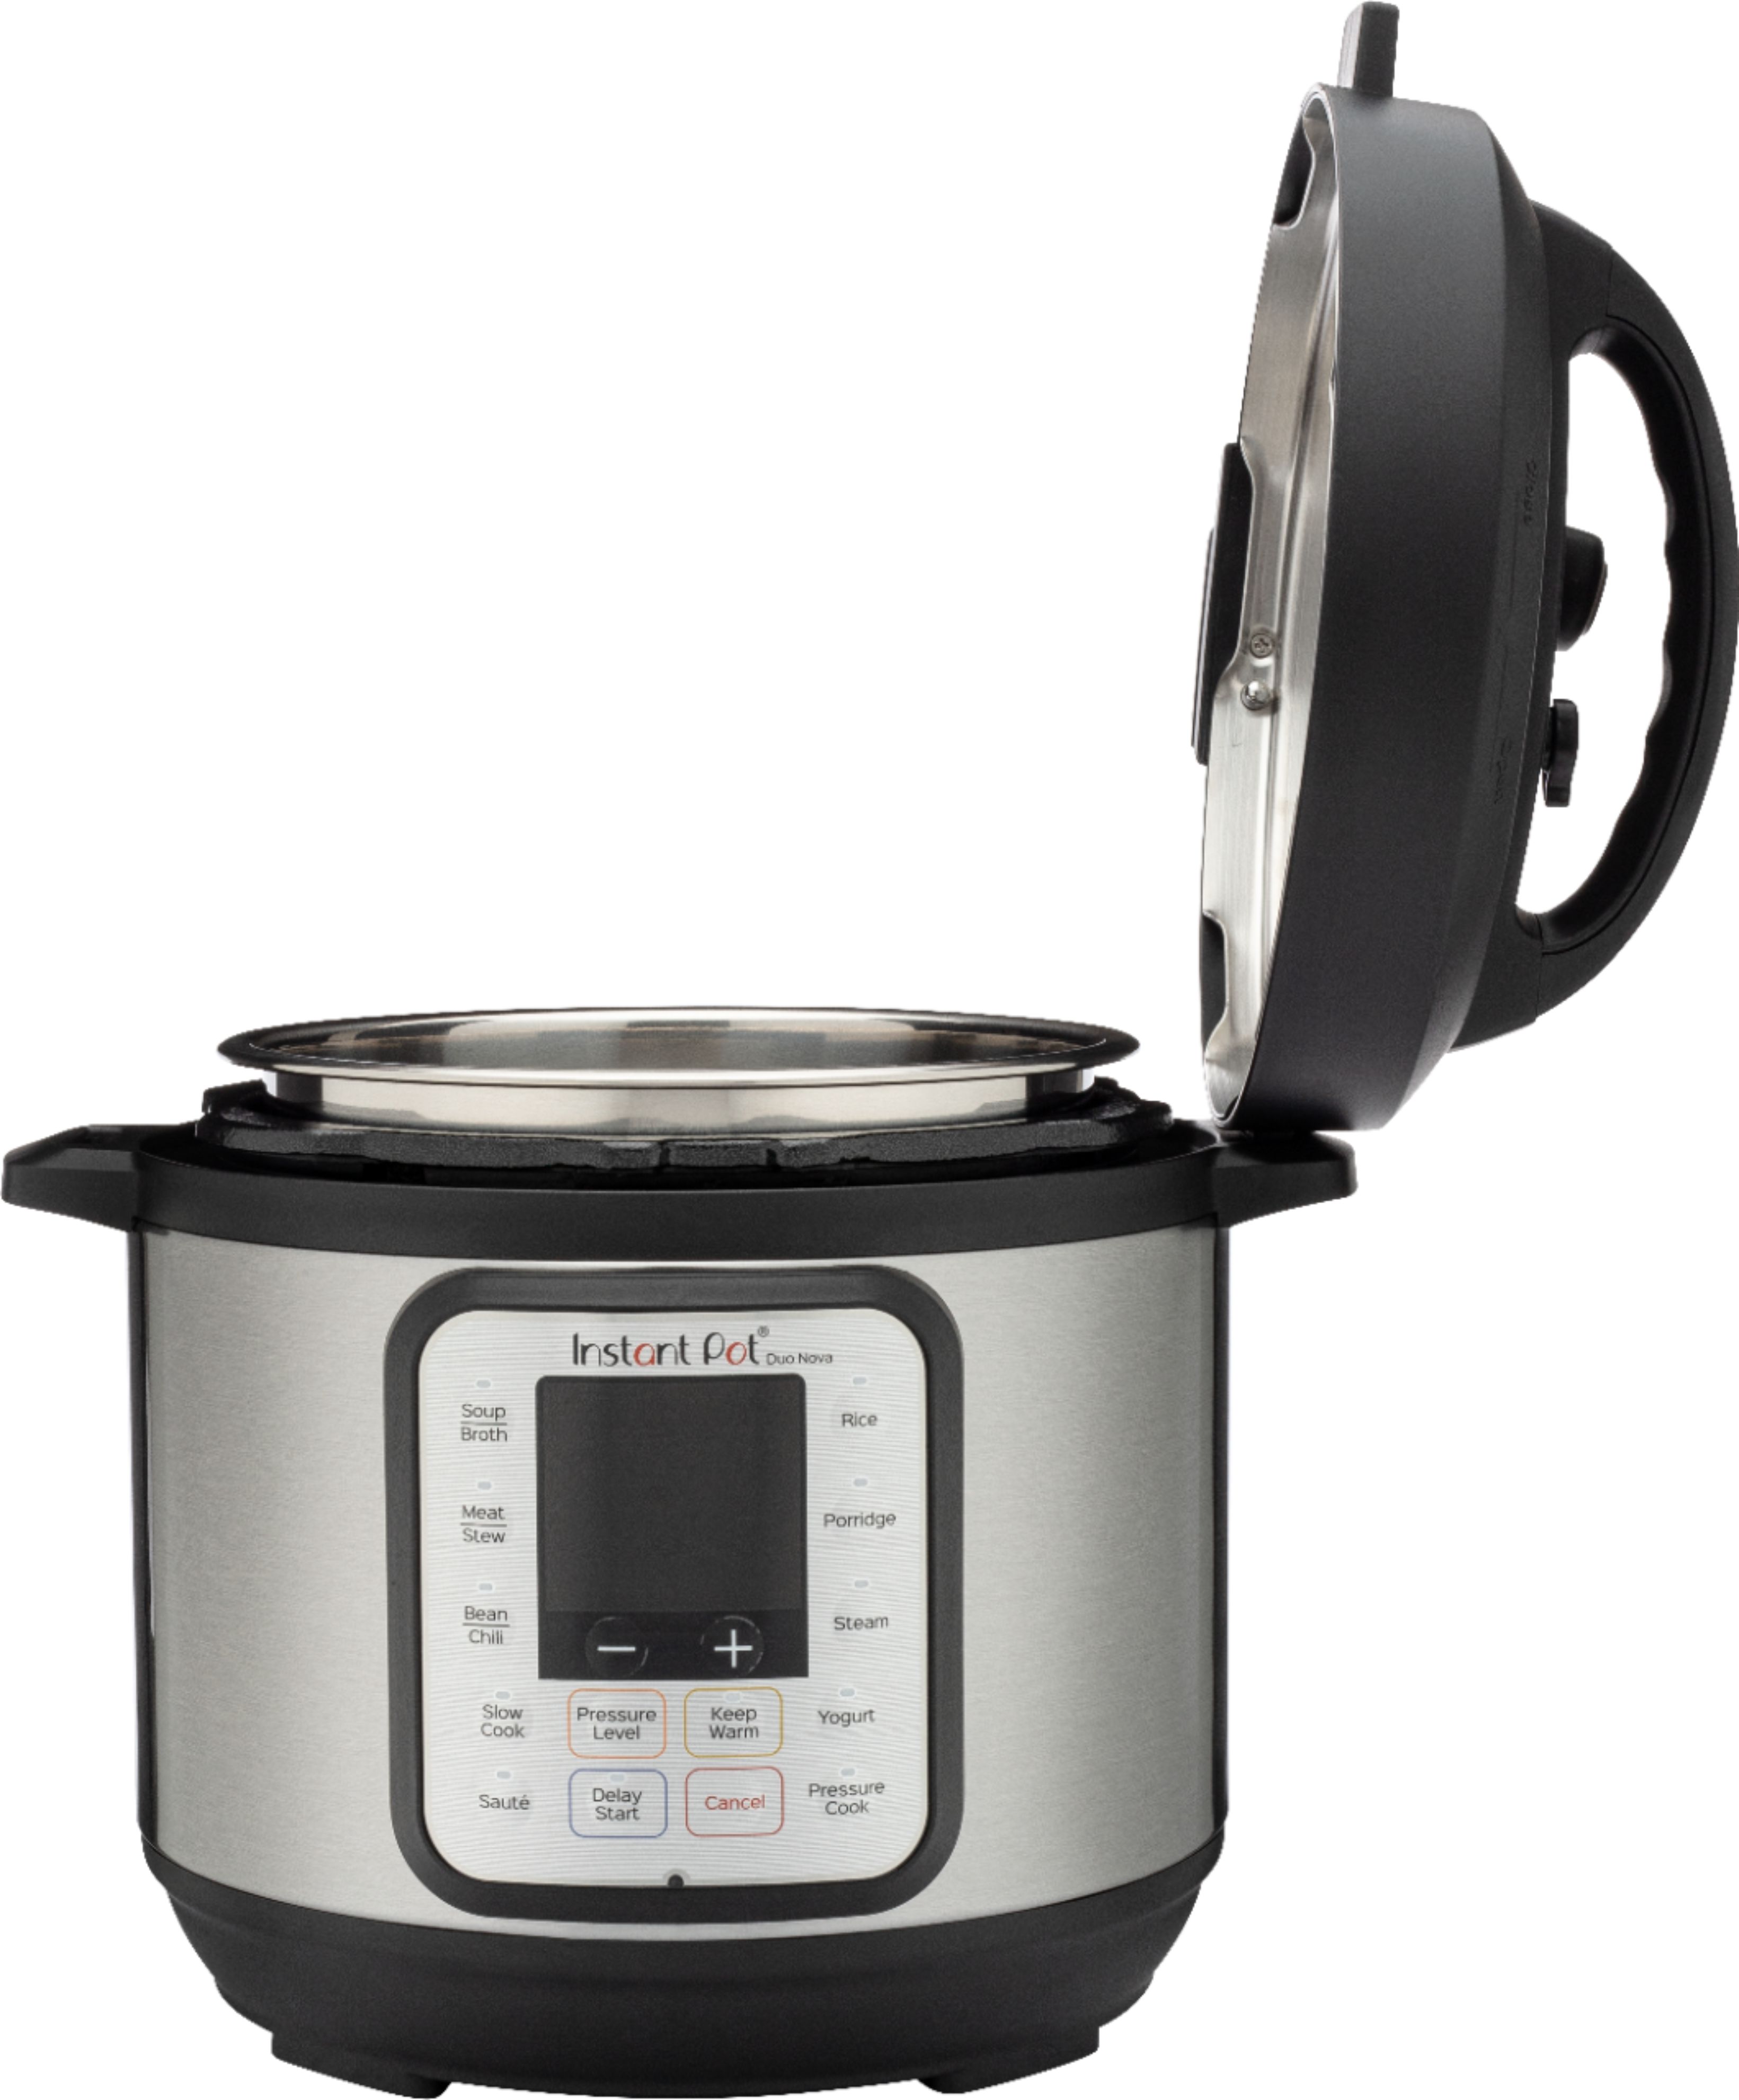 Instant Pot Duo Nova. 6 Qt. Used Once. All perfect in Original Box. $70 -  household items - by owner - housewares sale